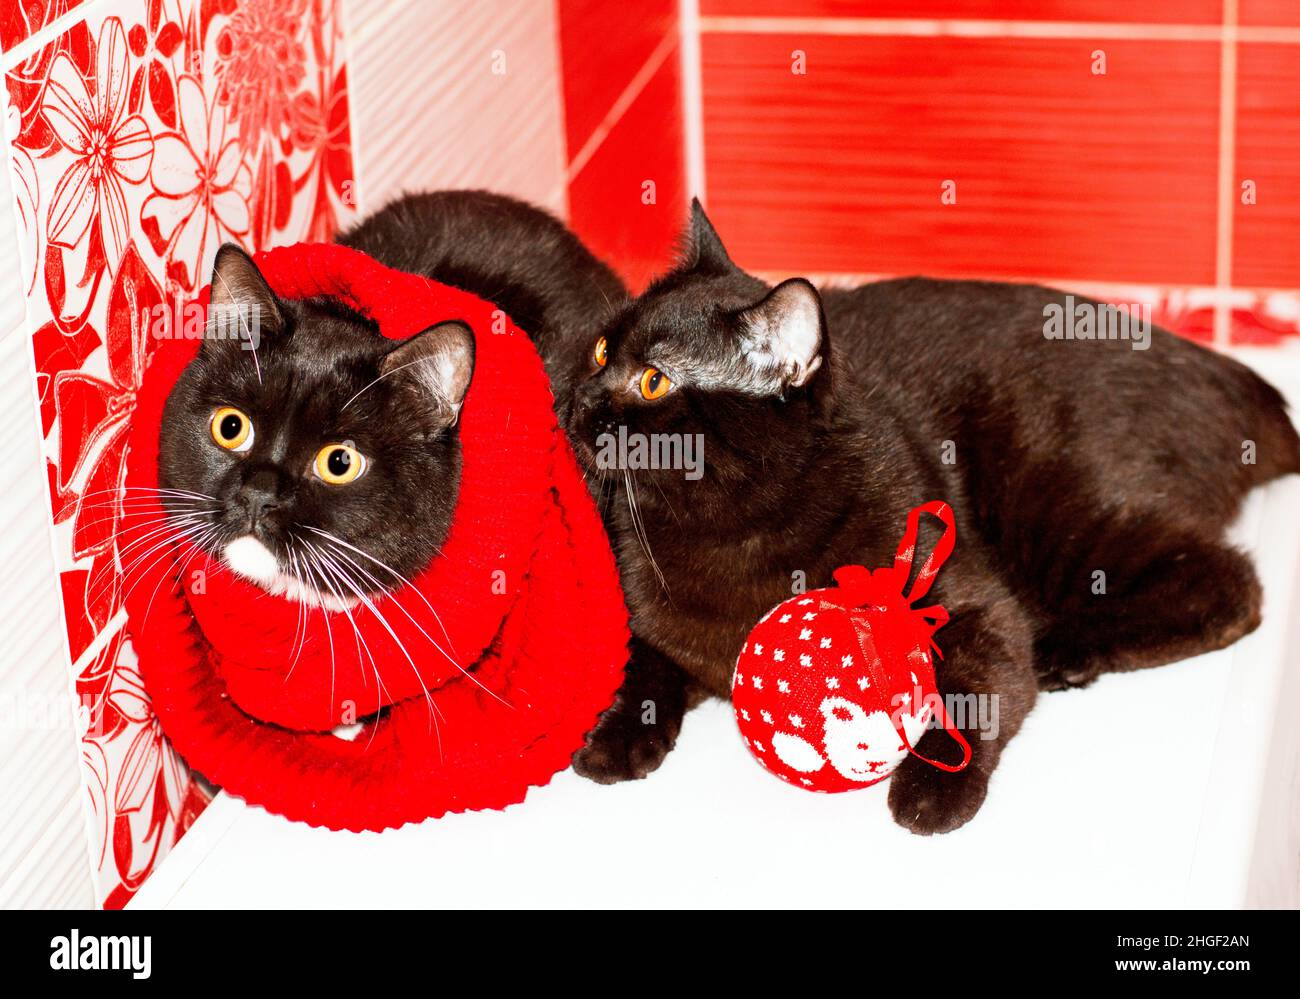 two dark Scottish British cats lie together with a red Christmas toy, winter is cold, the theme is cats, kittens and cats in the house, pets their pho Stock Photo